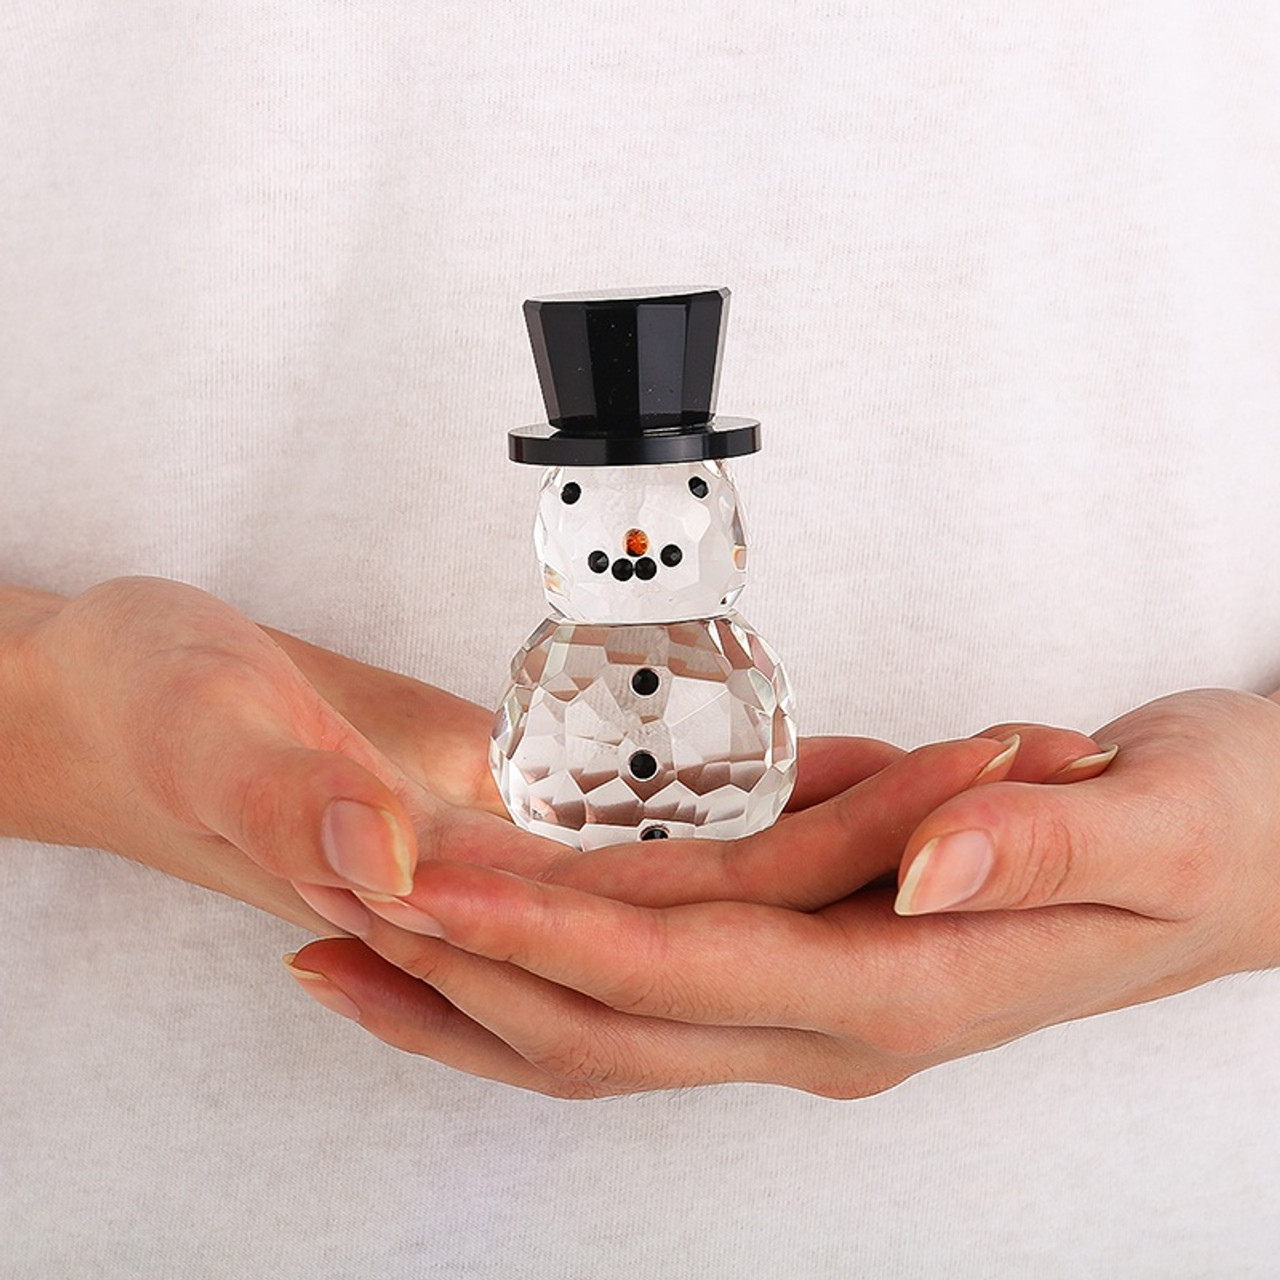 Crystal Snowman with Black Tophat